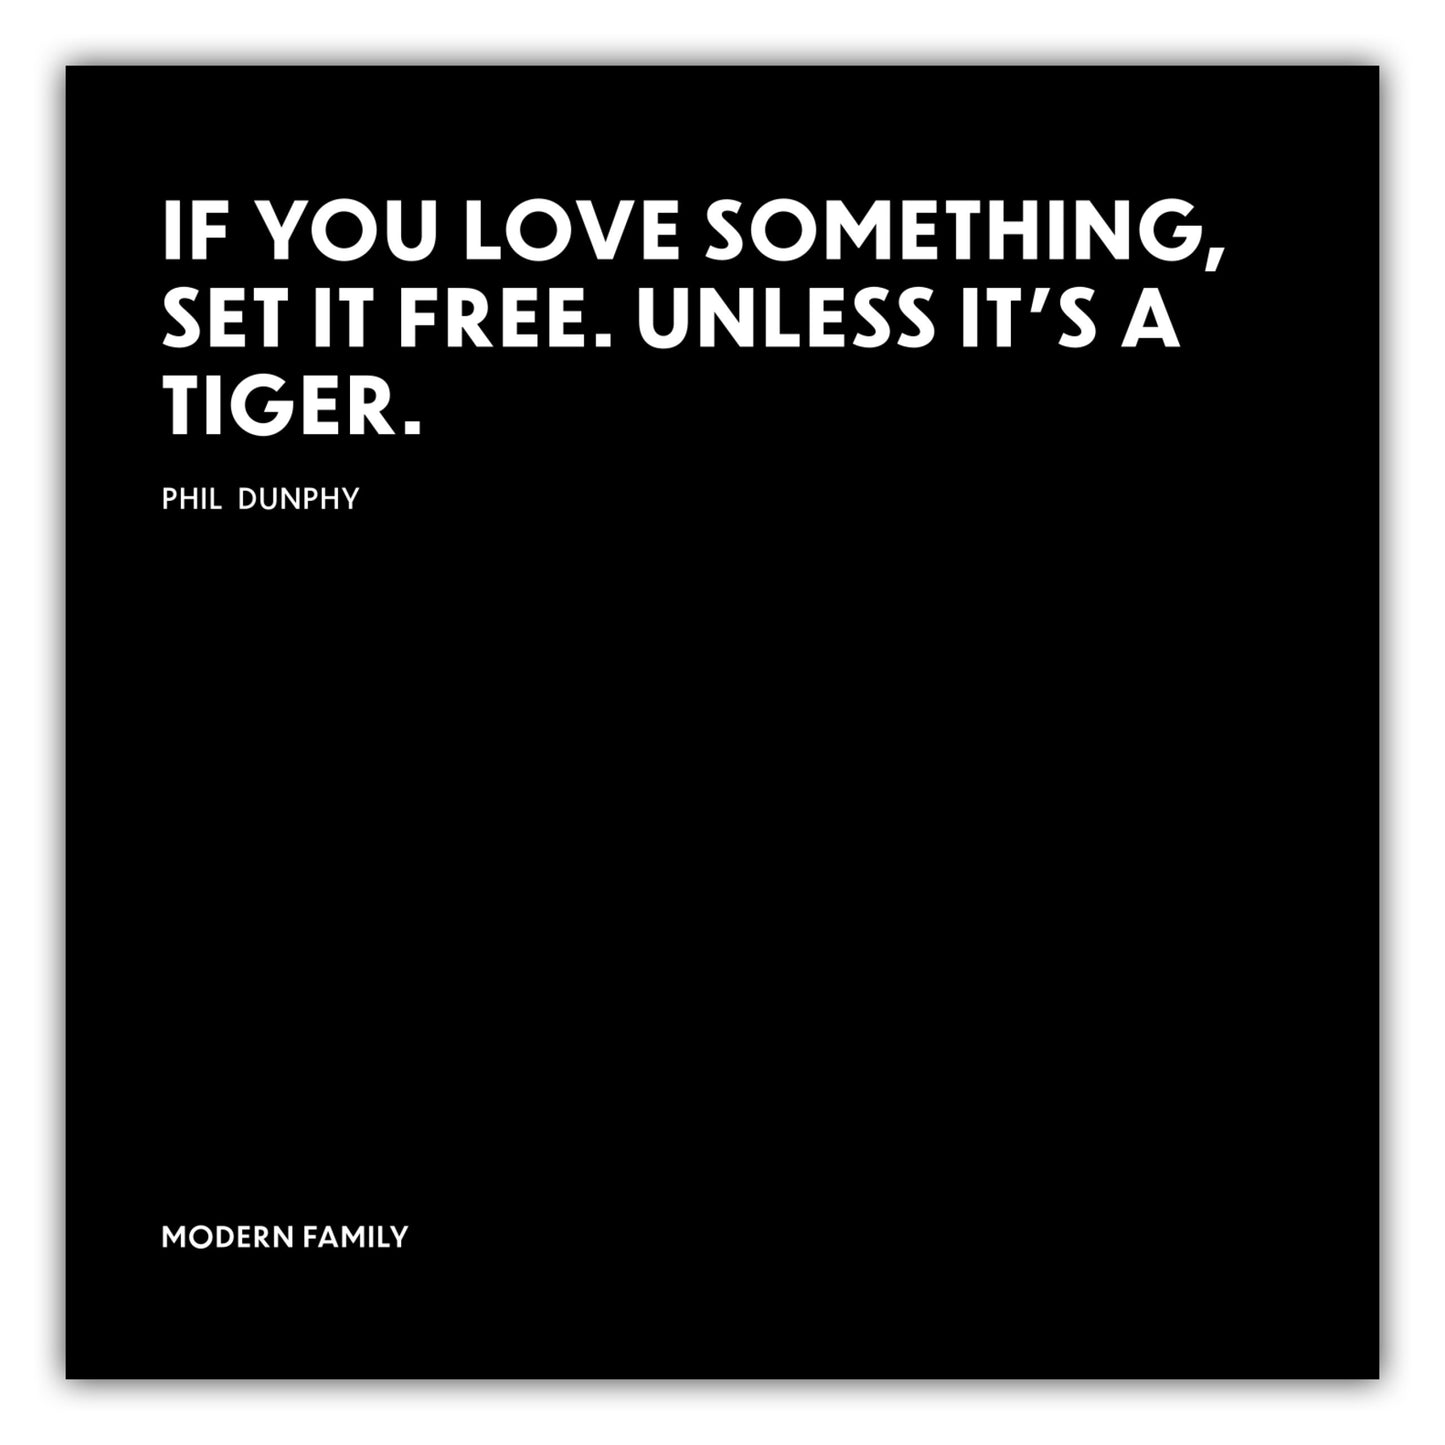 Poster If you love something, set it free. Unless its a tiger. - Phil Dunphy - Modern Family